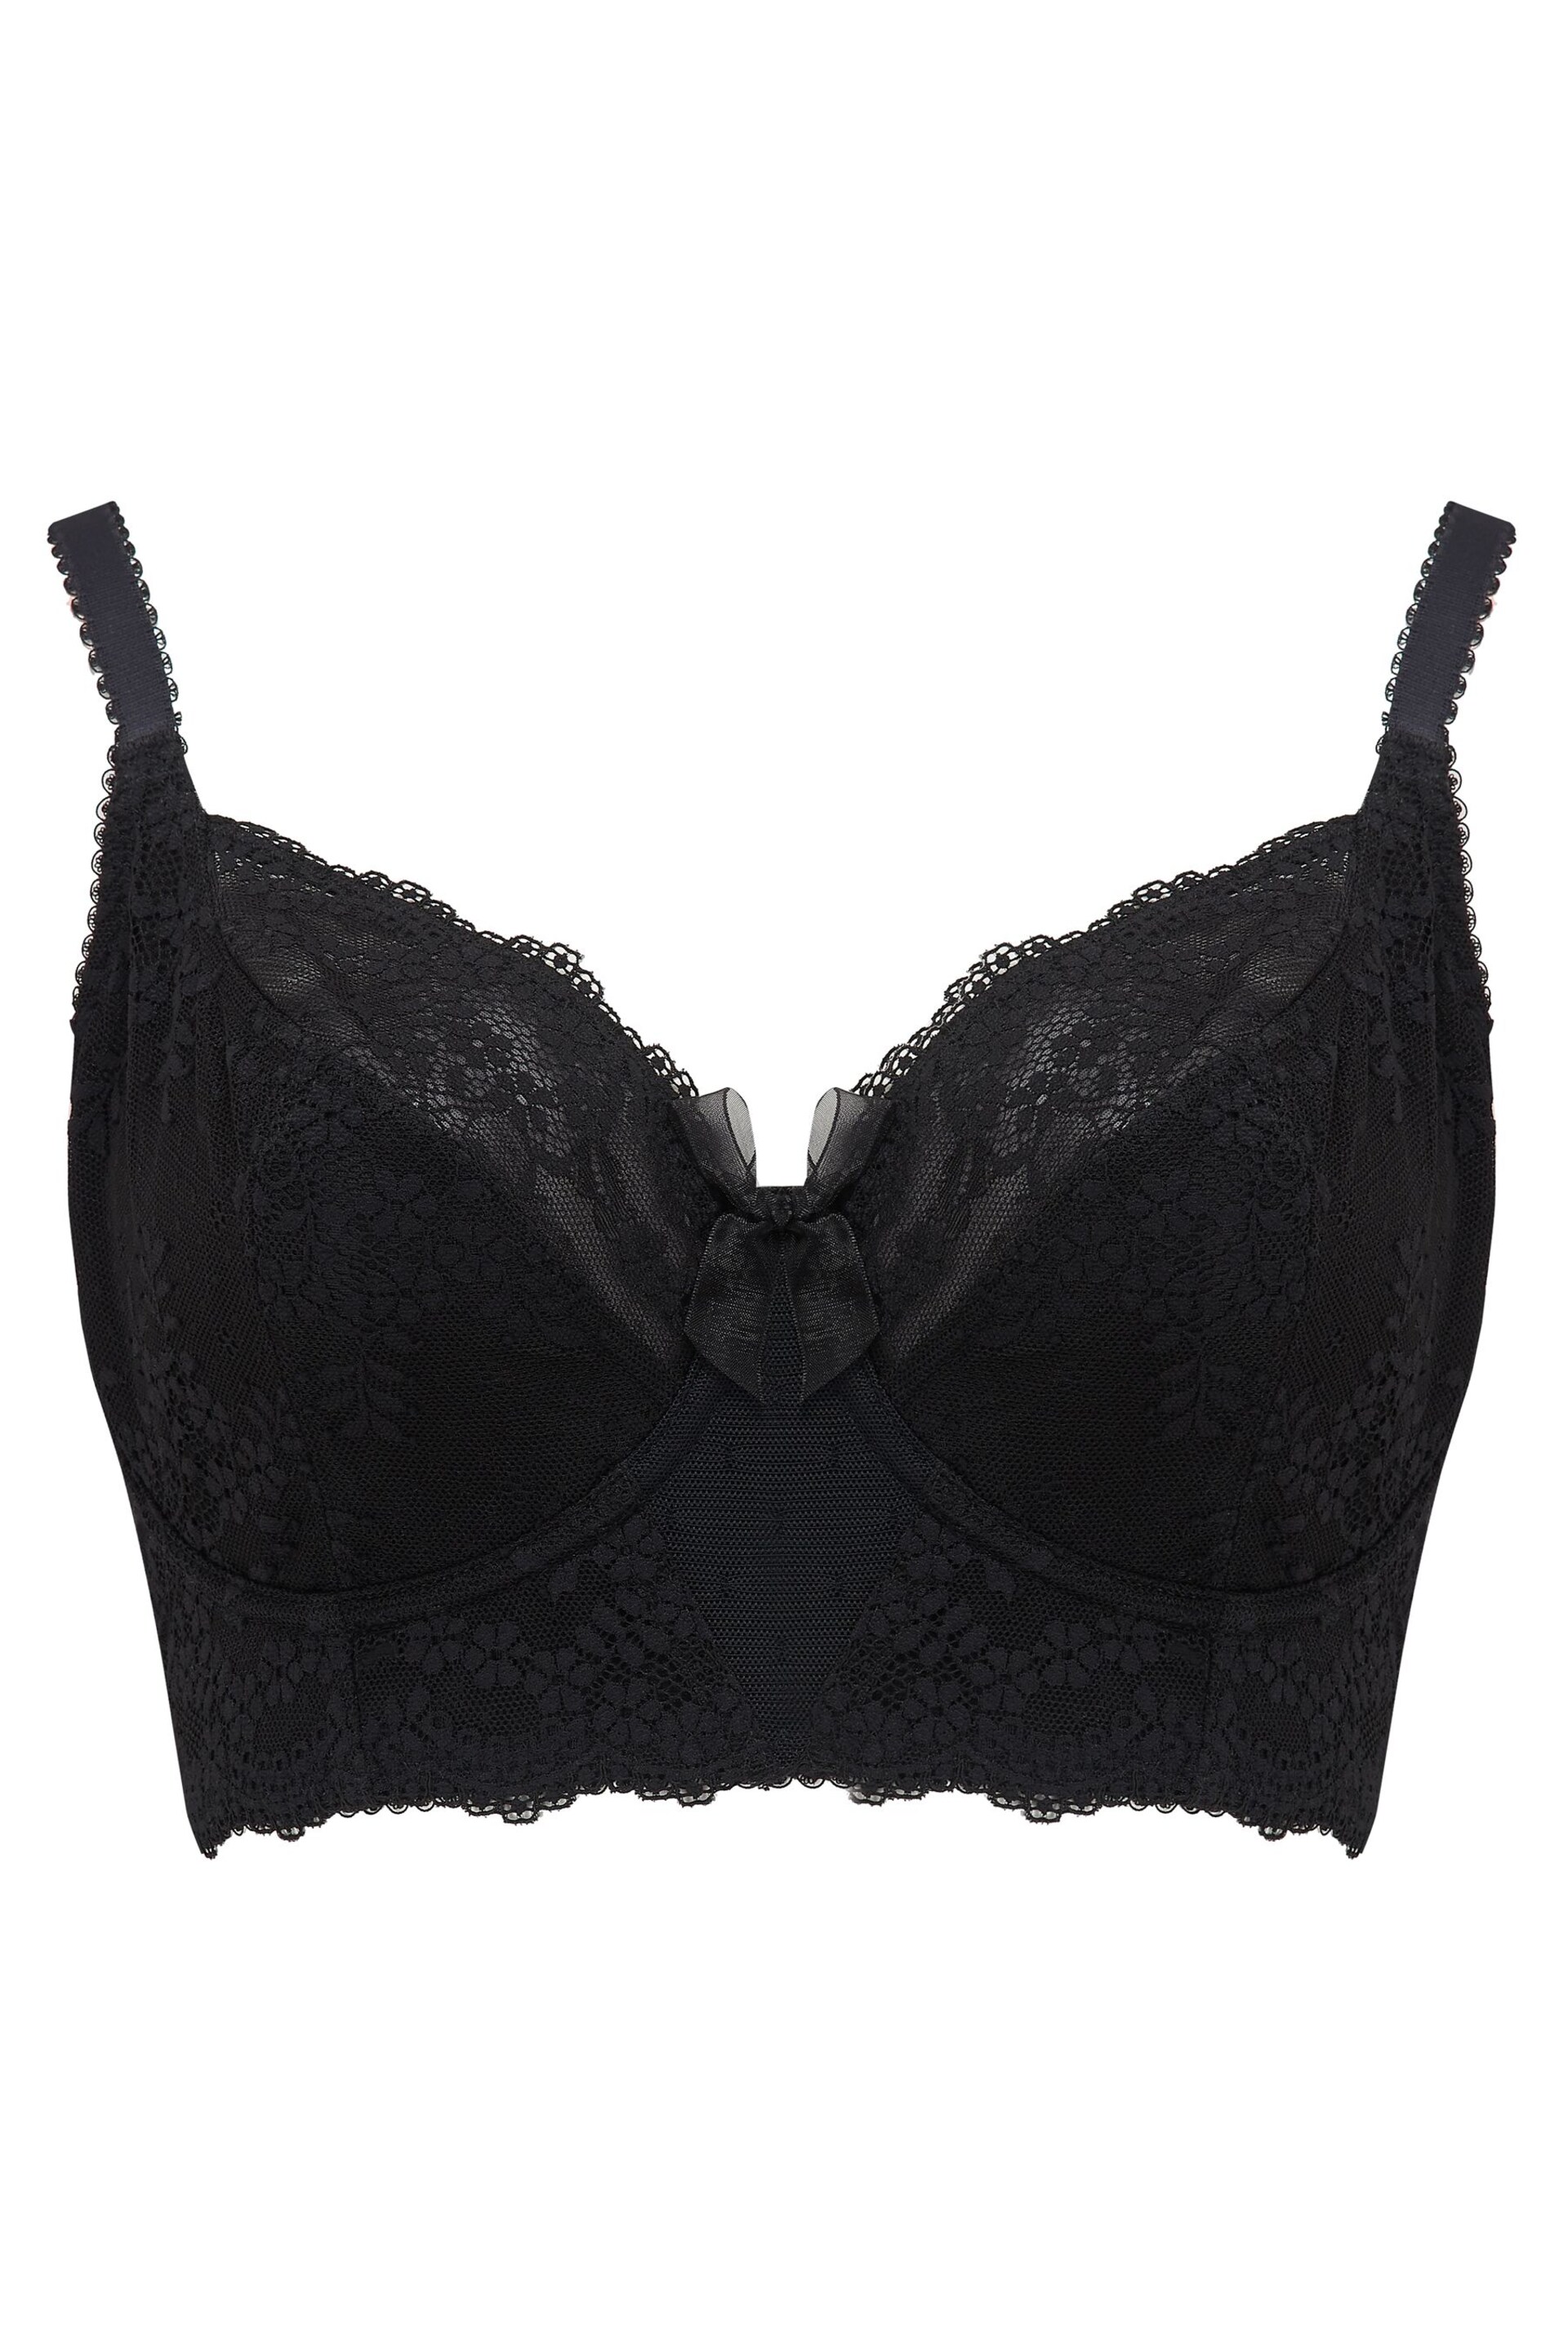 Pour Moi Black Non Padded Flora Longline Underwired Bra - Image 4 of 5